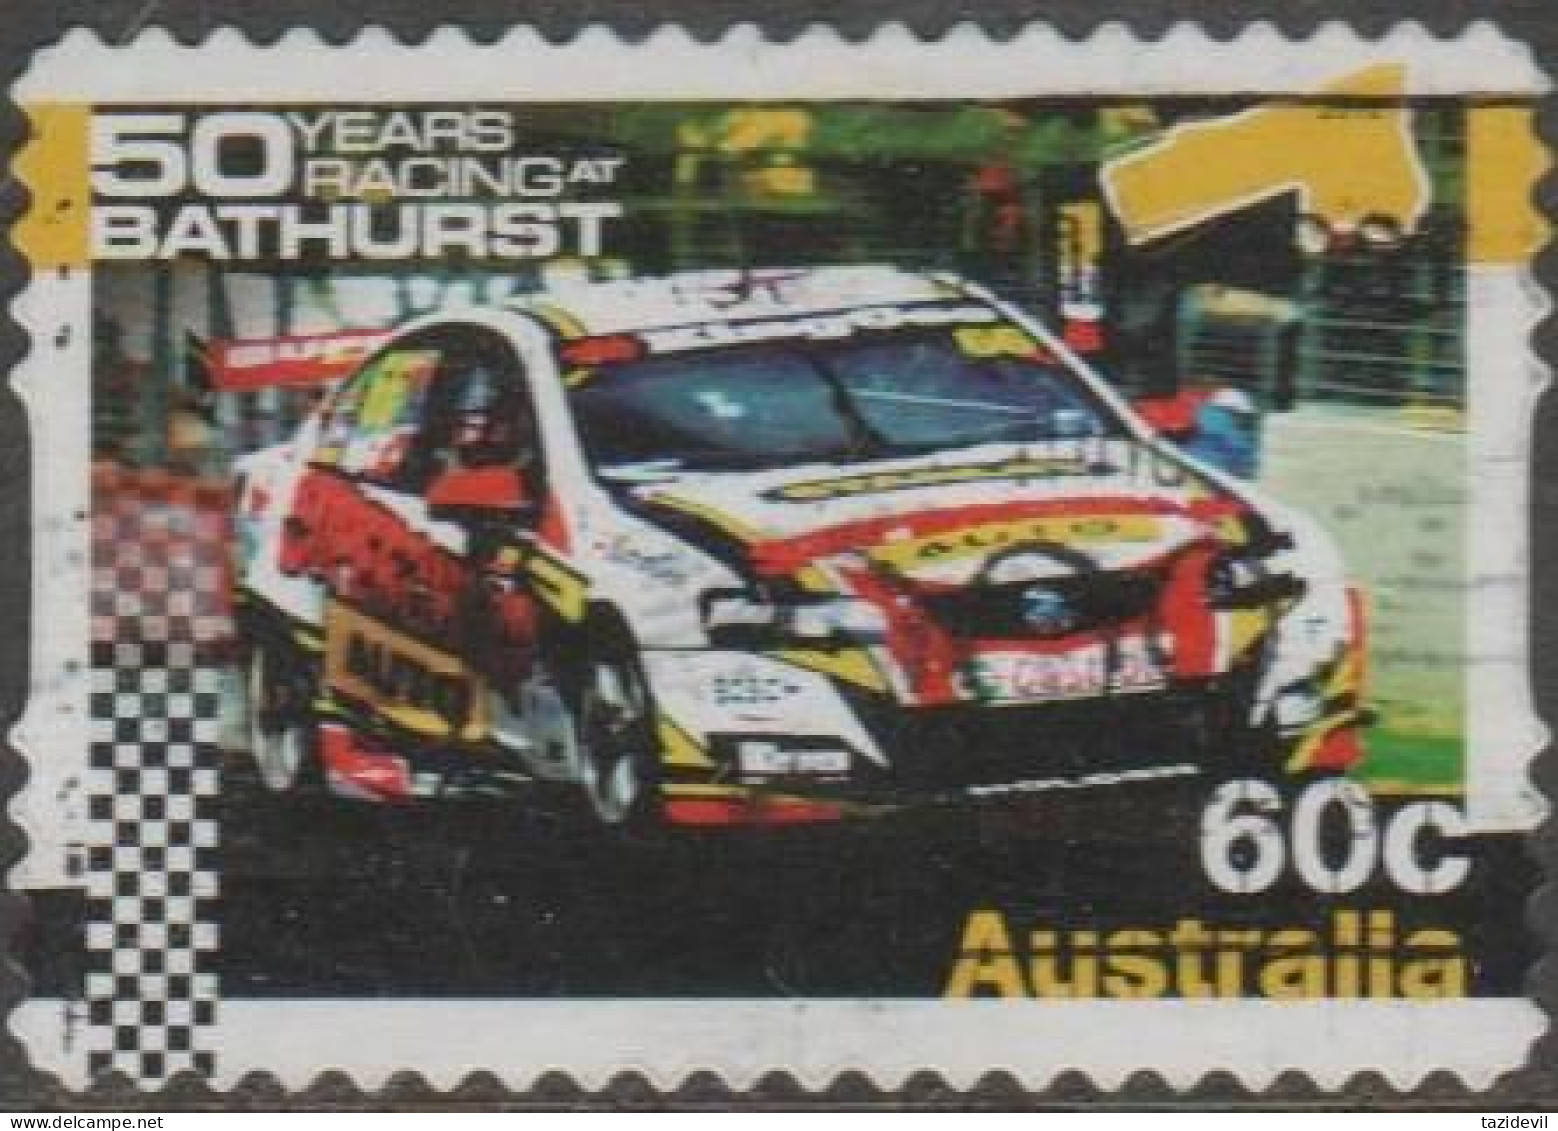 AUSTRALIA - DIE-CUT-USED 2012 60c Fifty Years Of Motor Racing At Bathurst - Ingall's Holden - Oblitérés